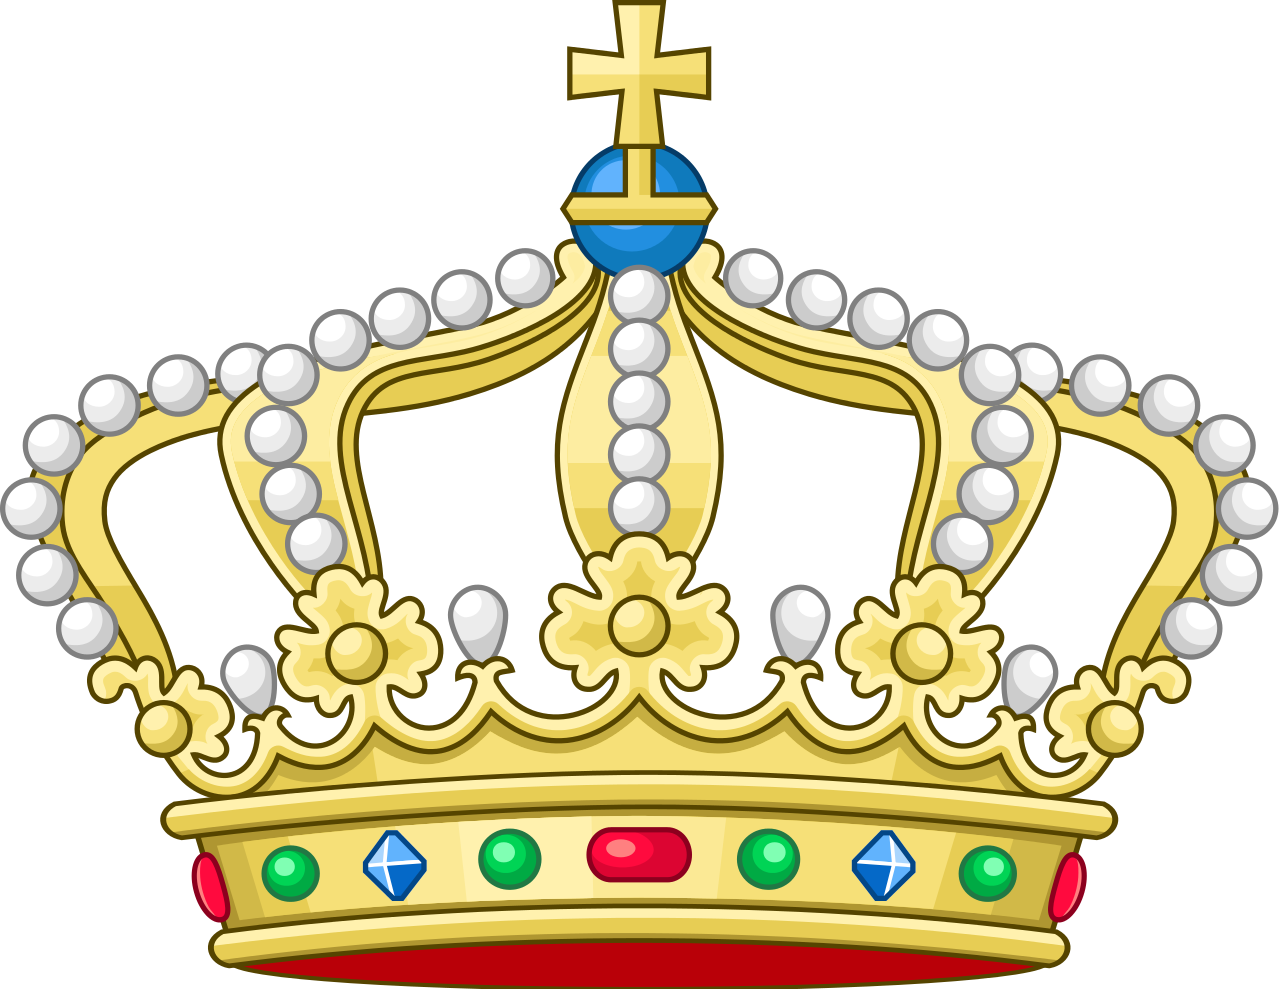 Royal Crown Of The Netherlands - Heraldic Royal Crown (1280x989)